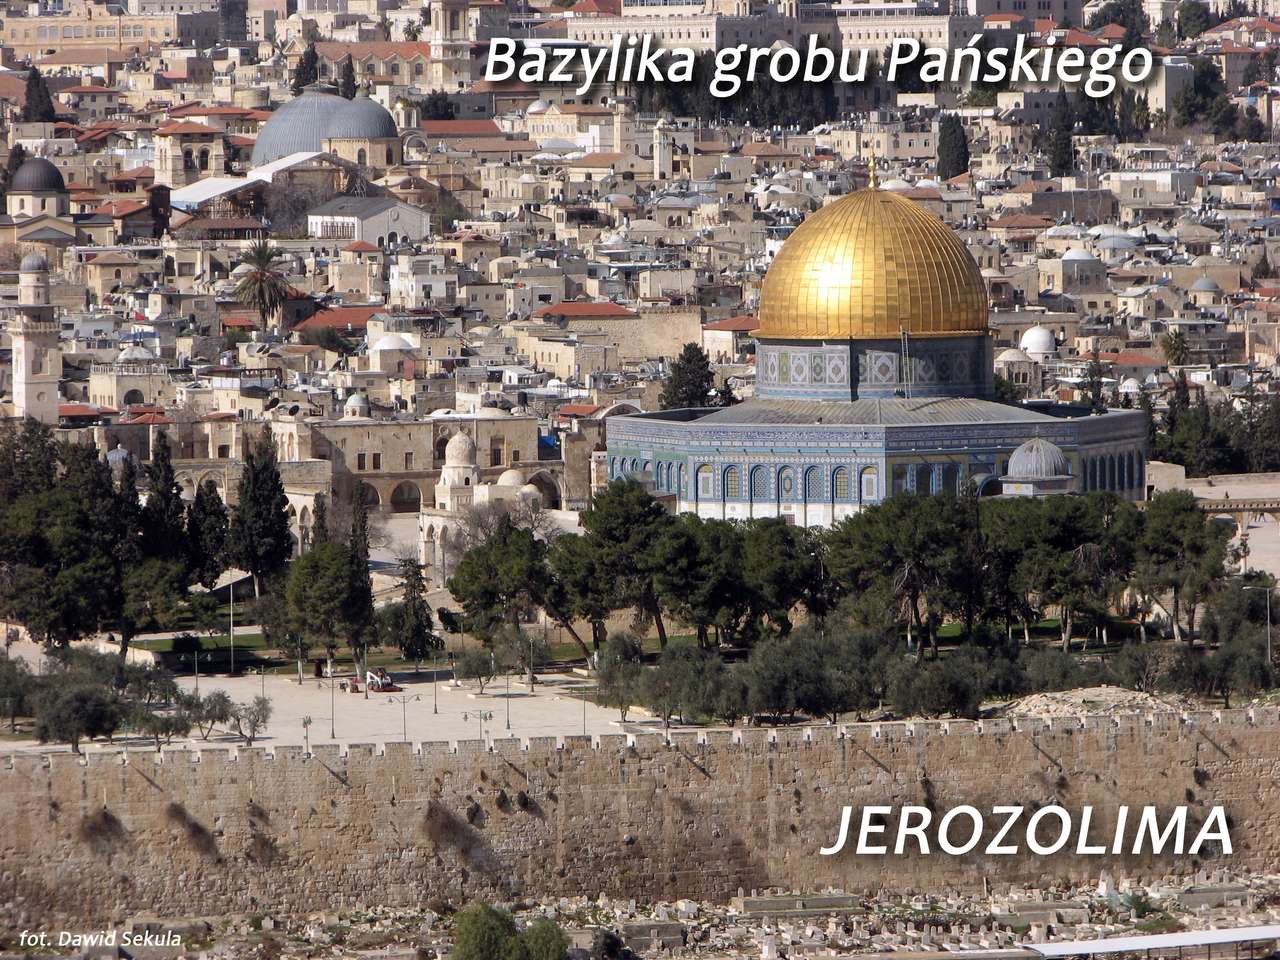 Jerusalem - Basilica of the Grave of the Lord online puzzle